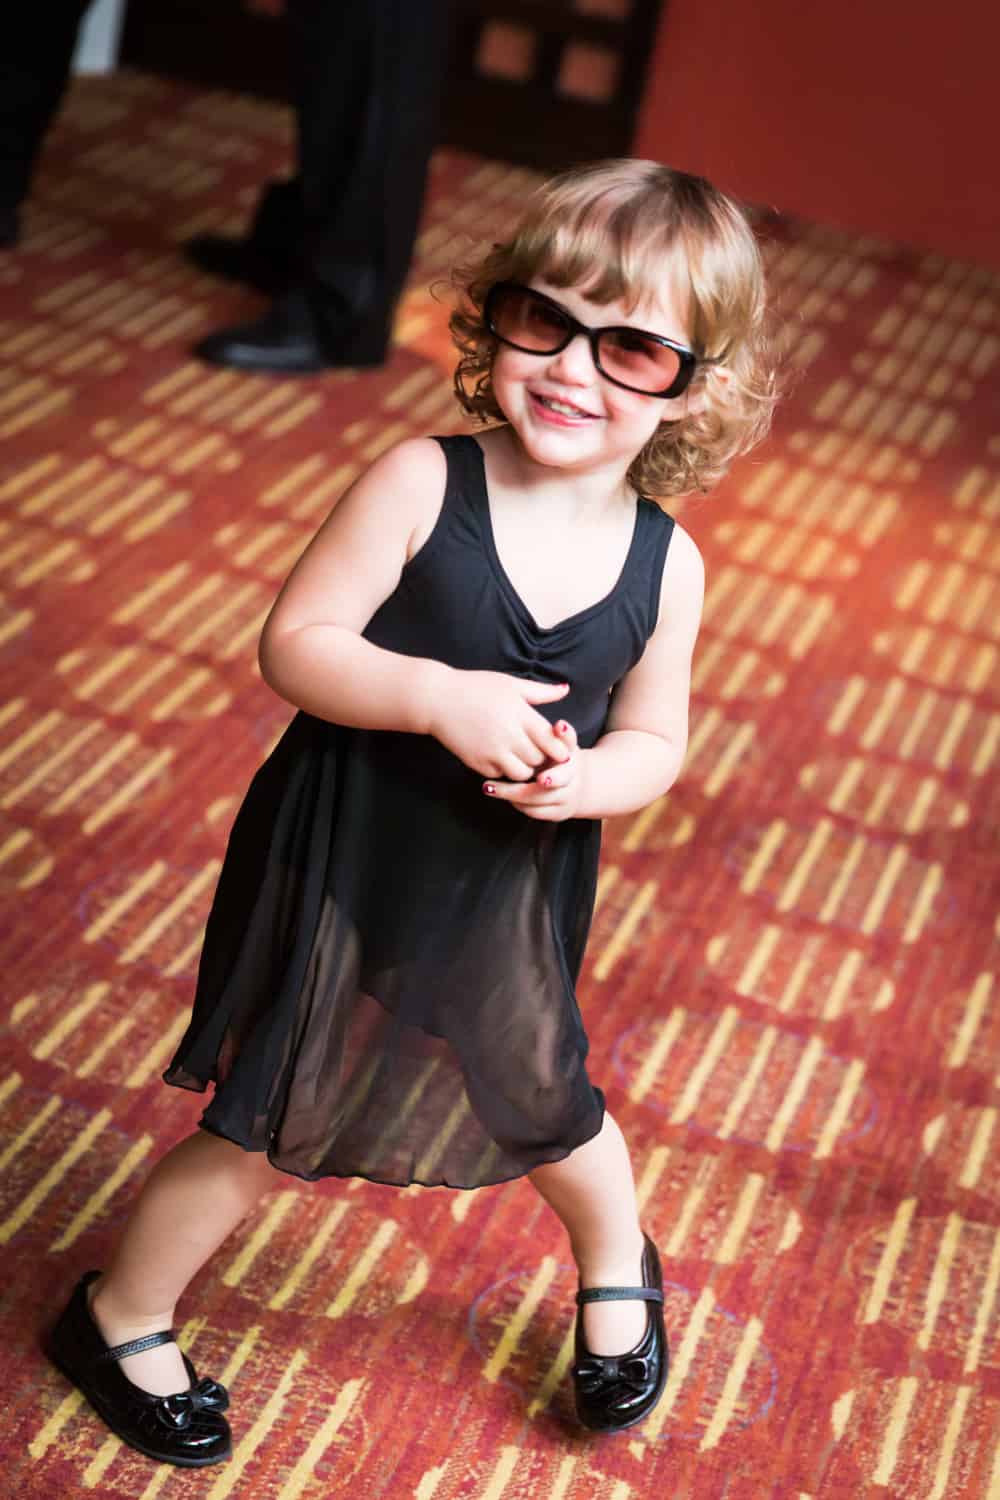 Little girl in black dress and sunglasses dancing